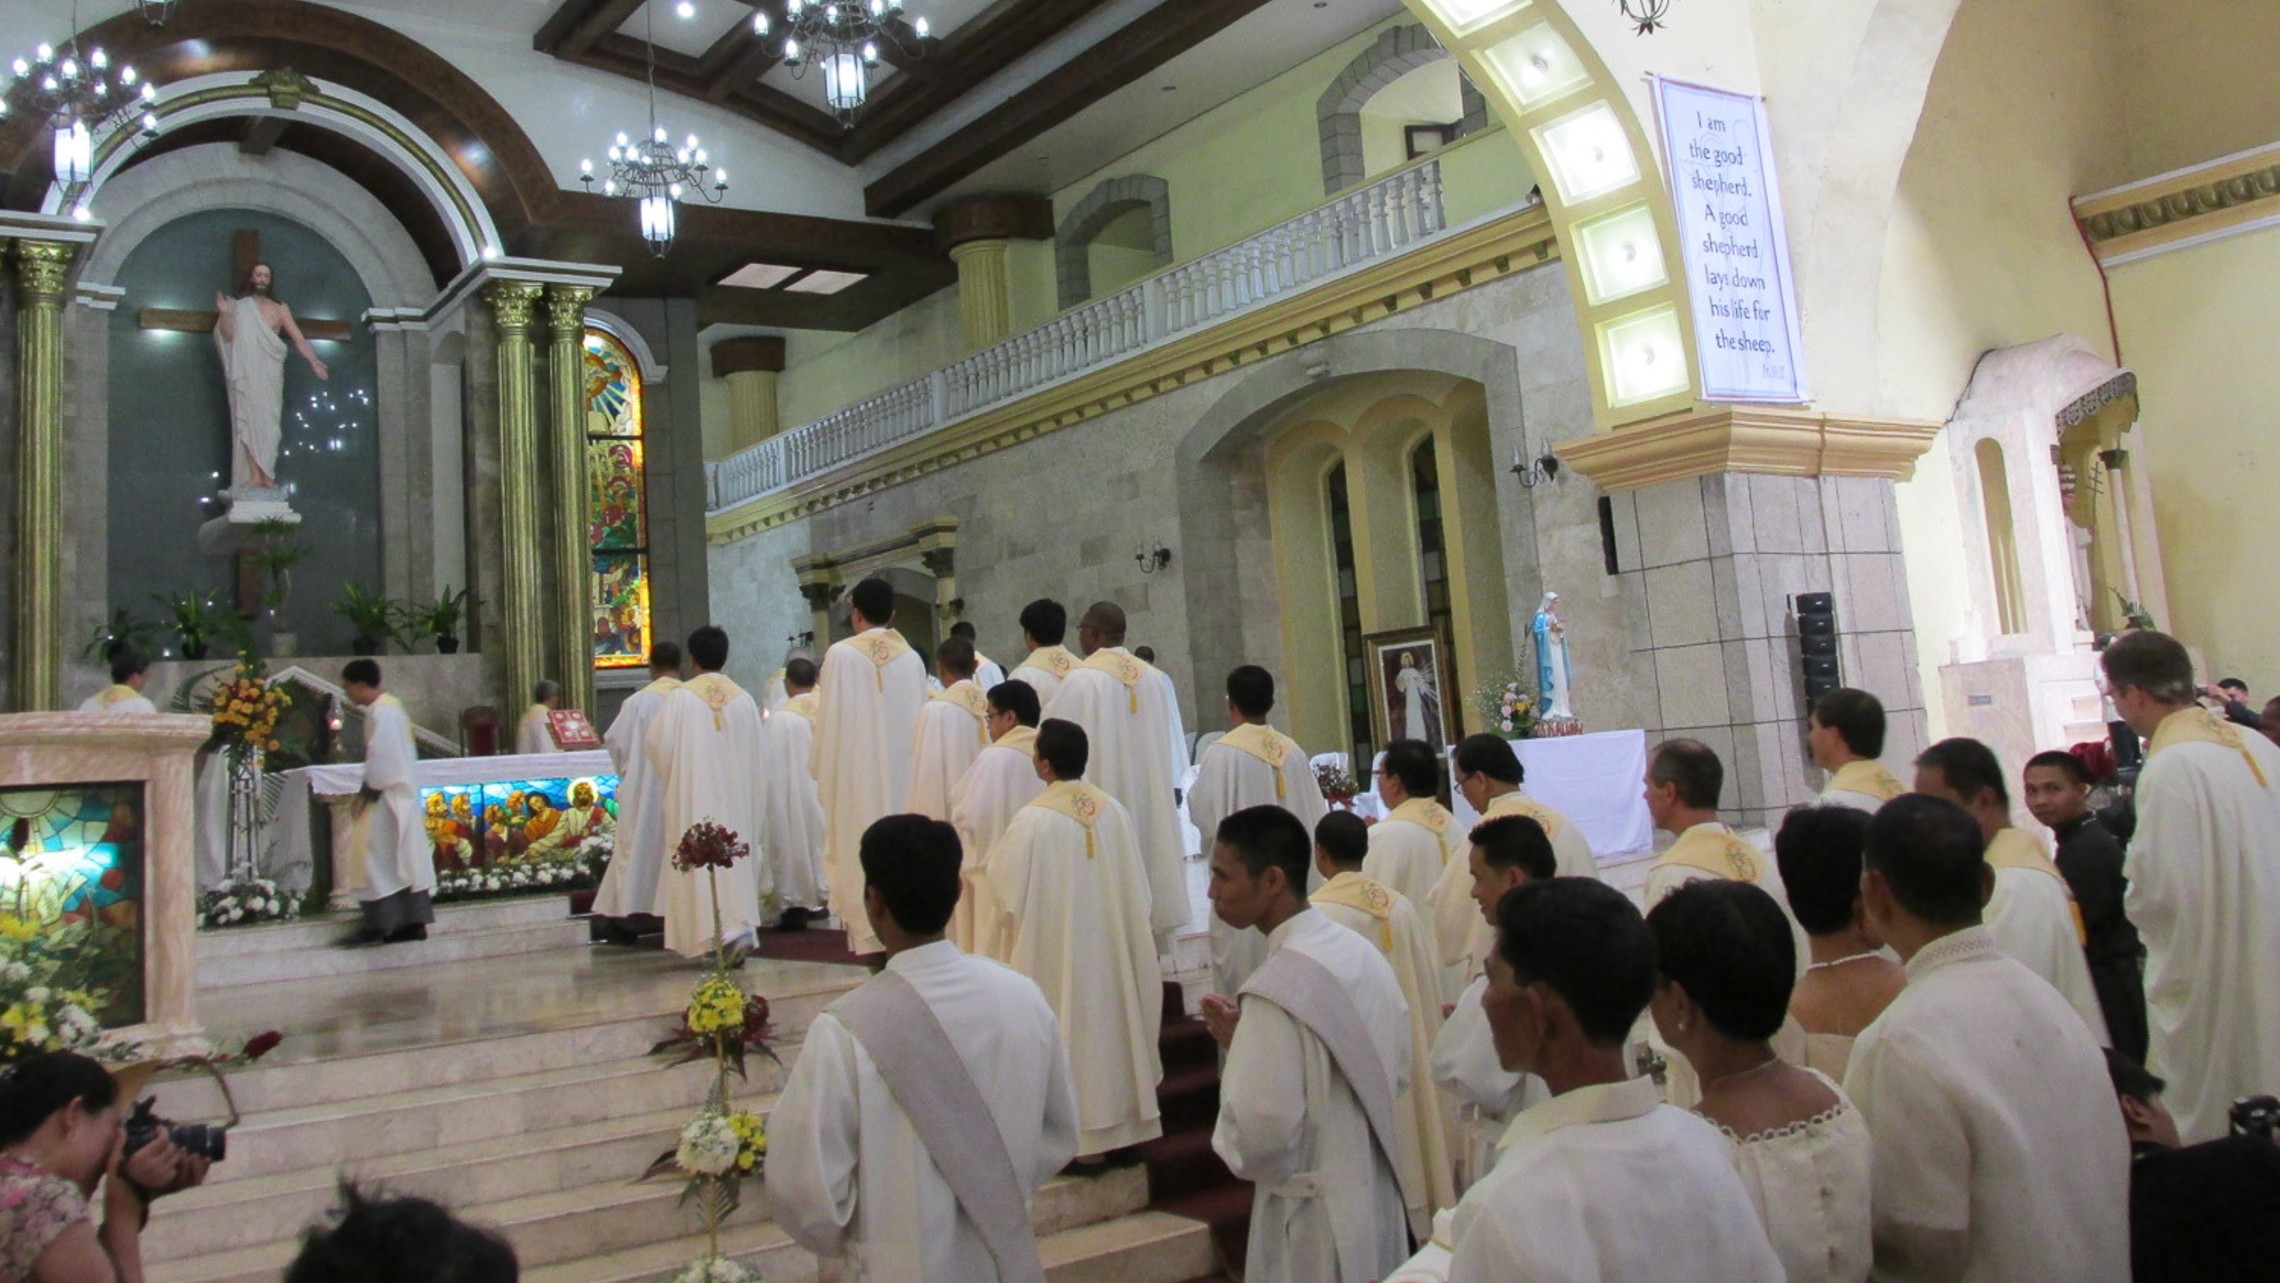 Diocese of Legazpi | Society of Our Lady of the Most Holy Trinity